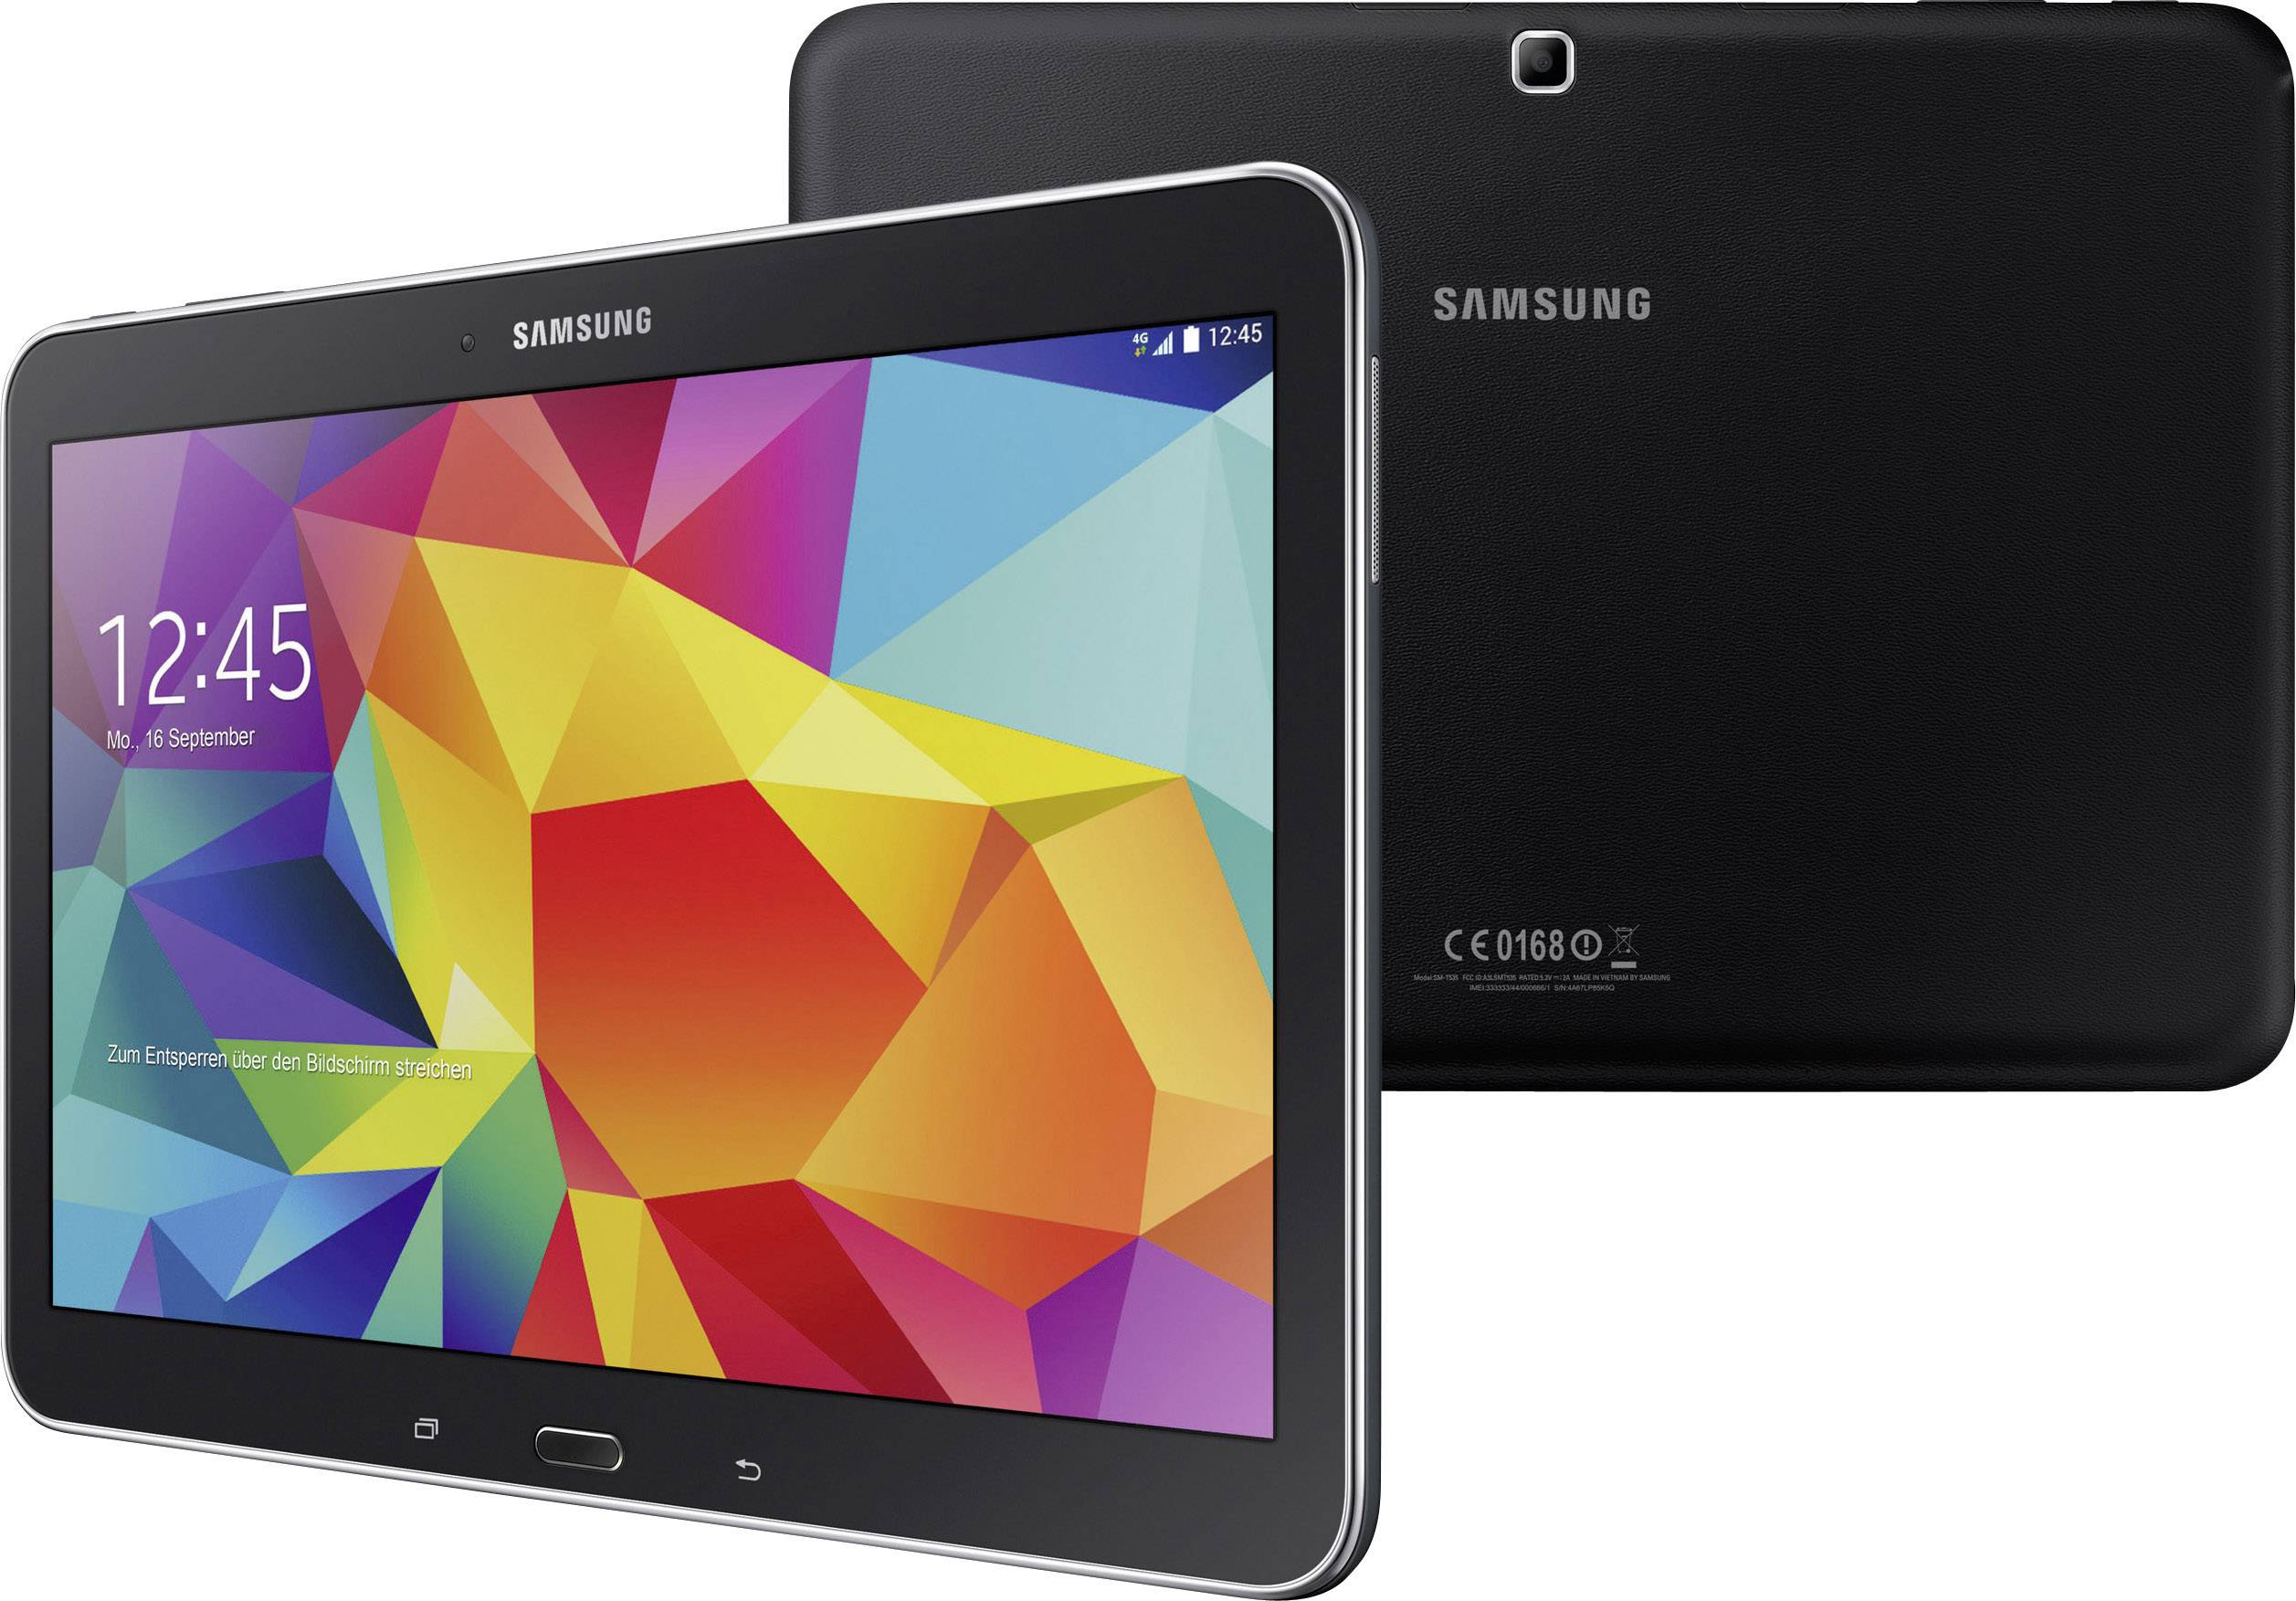 Galaxy Tab 4 WiFi 16 GB Sort Android-tablet 25.7 cm (10.1 tommer) 1.2 GHz Android™ 4.4 1280 800 Pixel | Conradelektronik.dk